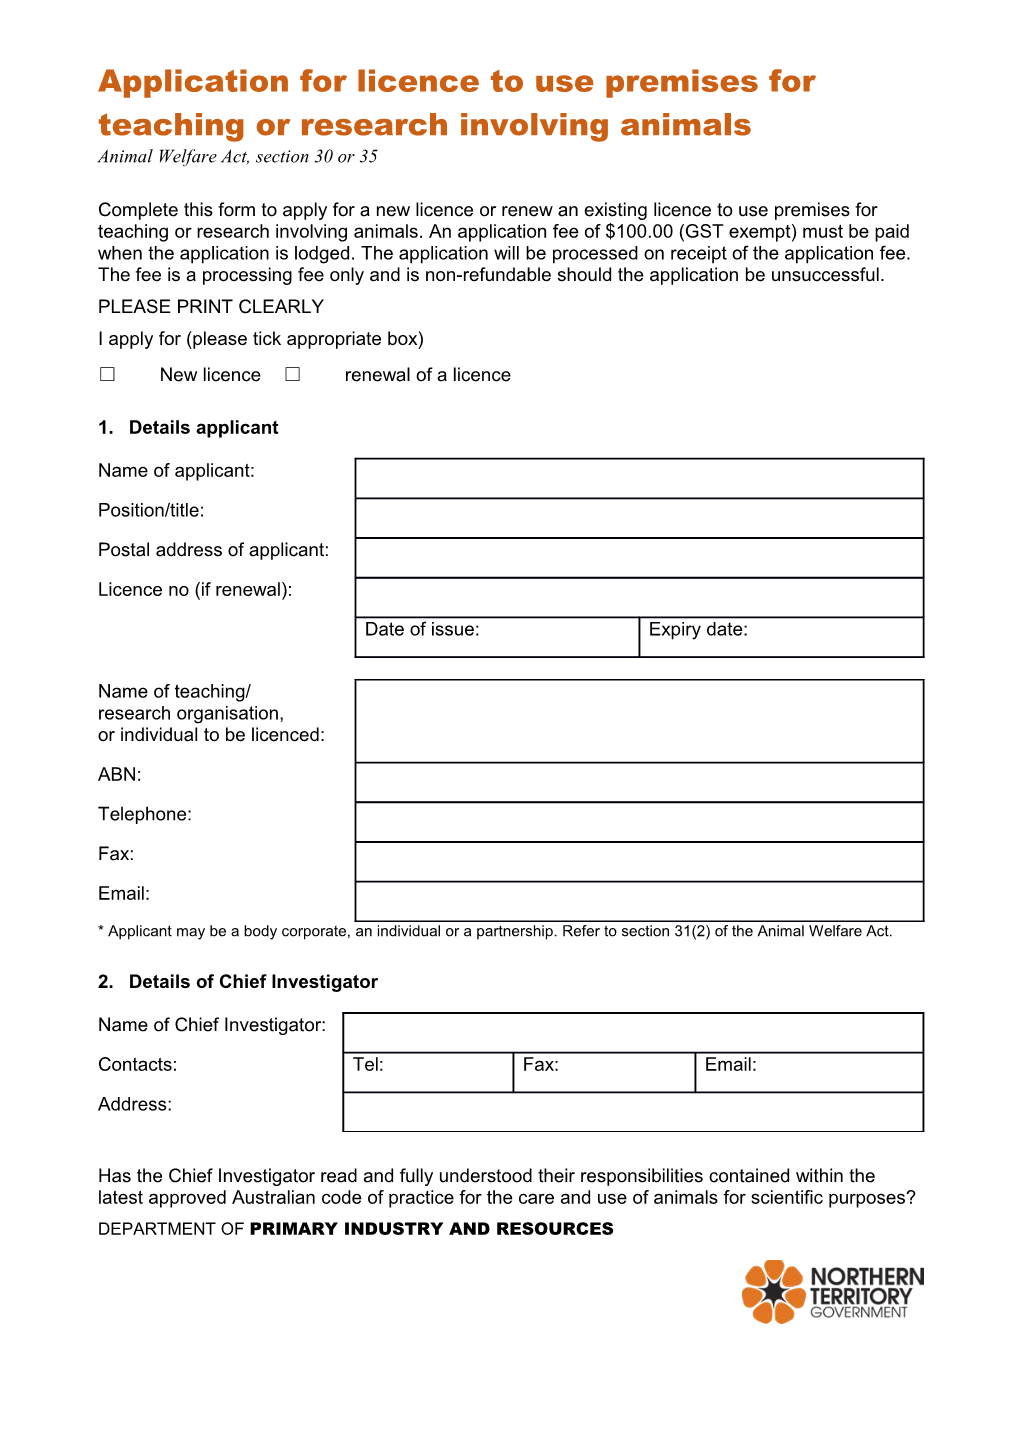 Application for Licence to Use Premises for Teaching Or Research Involving Animals